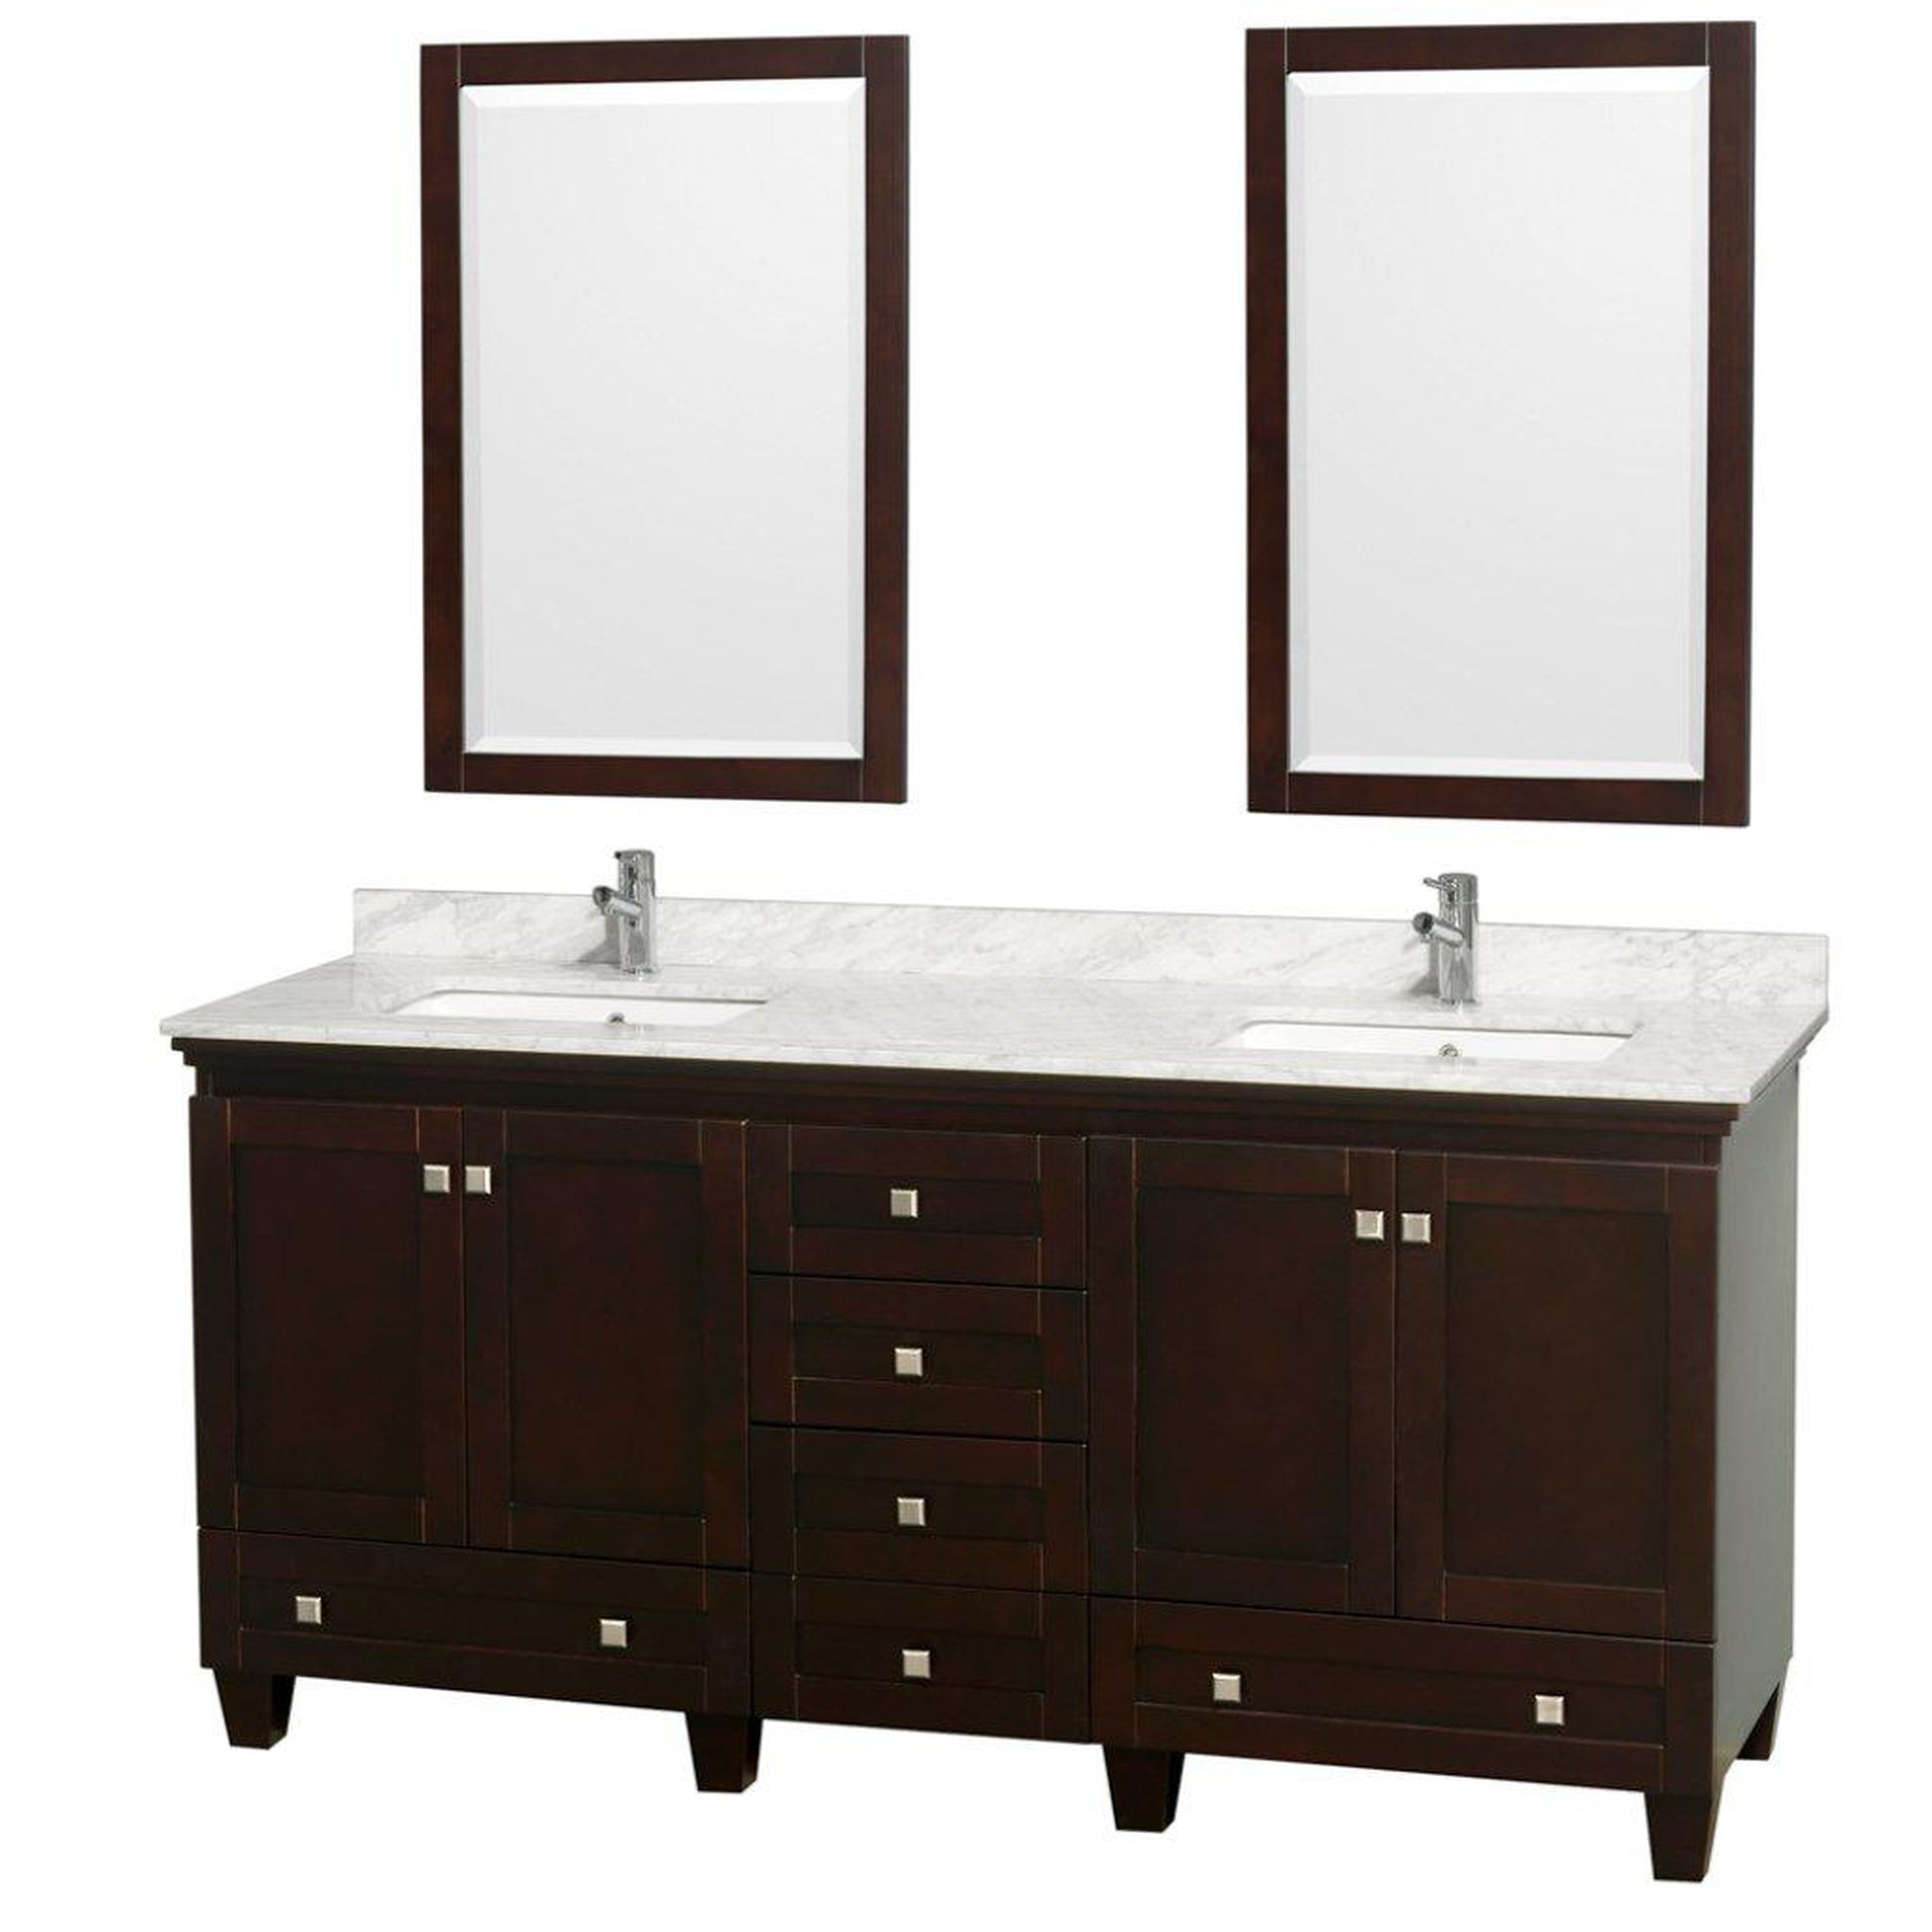 Wyndham Collection Acclaim 72" Double Bathroom Espresso Vanity With White Carrara Marble Countertop And Undermount Square Sinks And 2 Set Of 24" Mirror